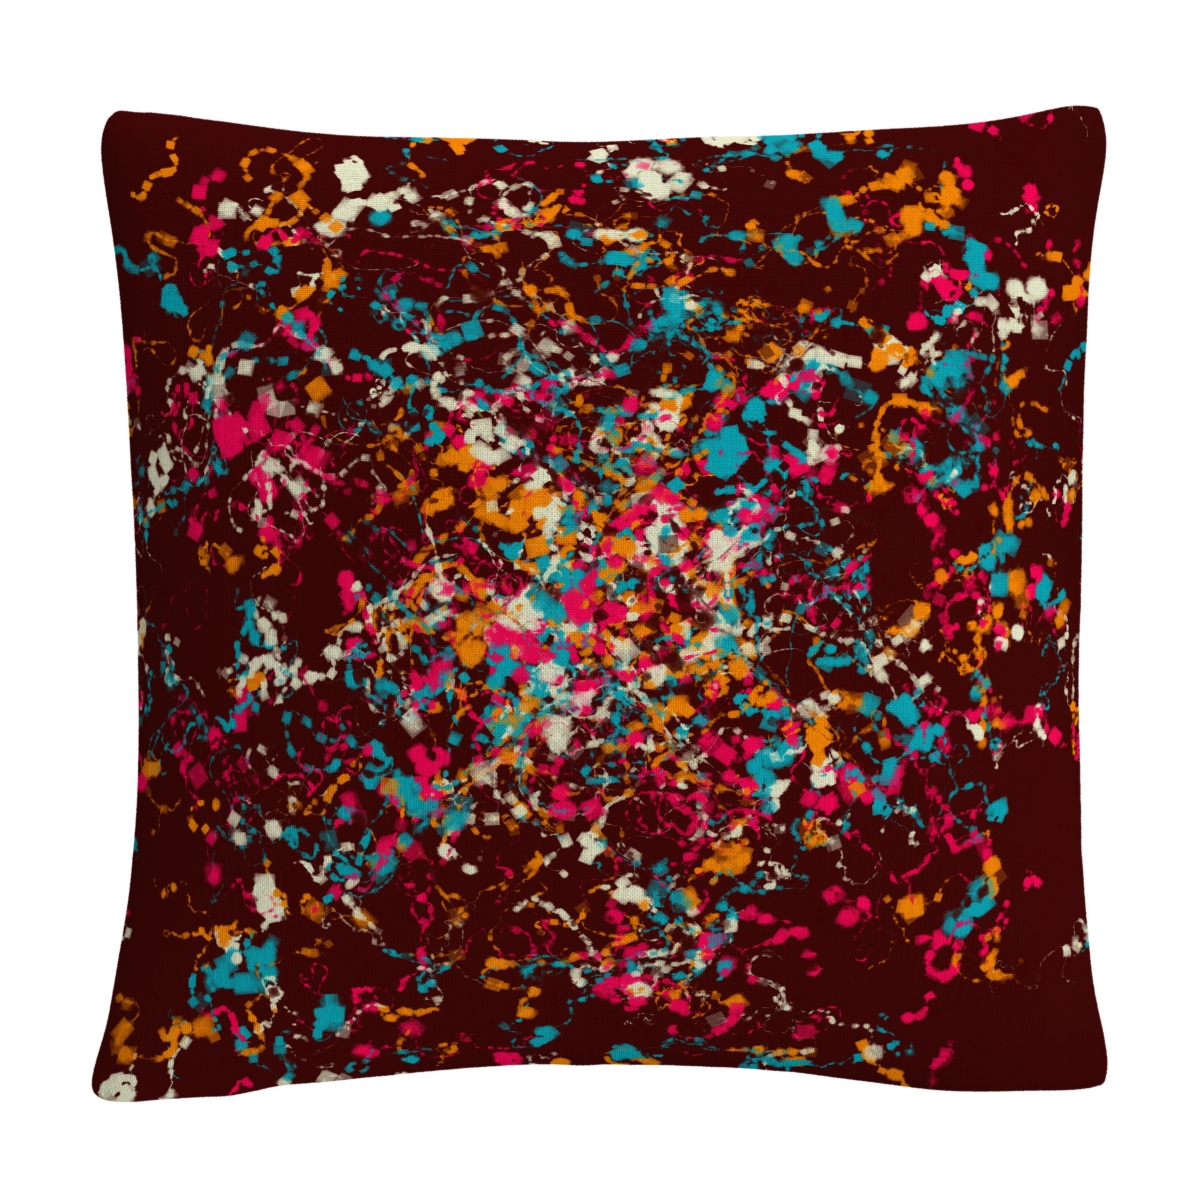 Abc Speckled Colorful Splatter Abstract 3Decorative Pillow, 16 x 16